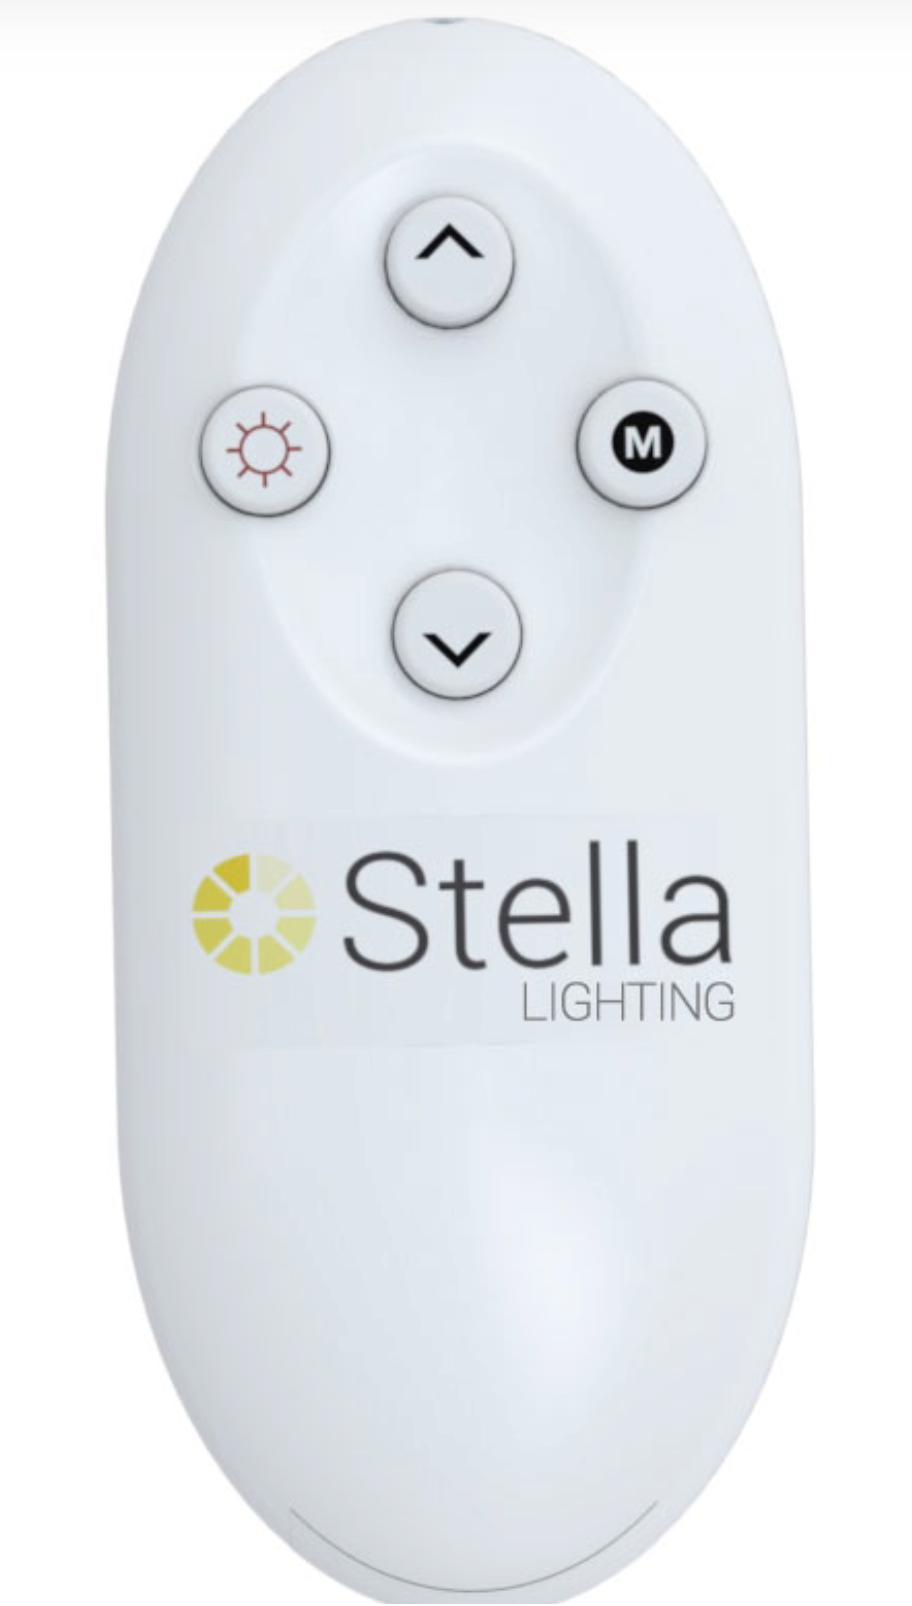 Stella Lighting - Replacement Accessories